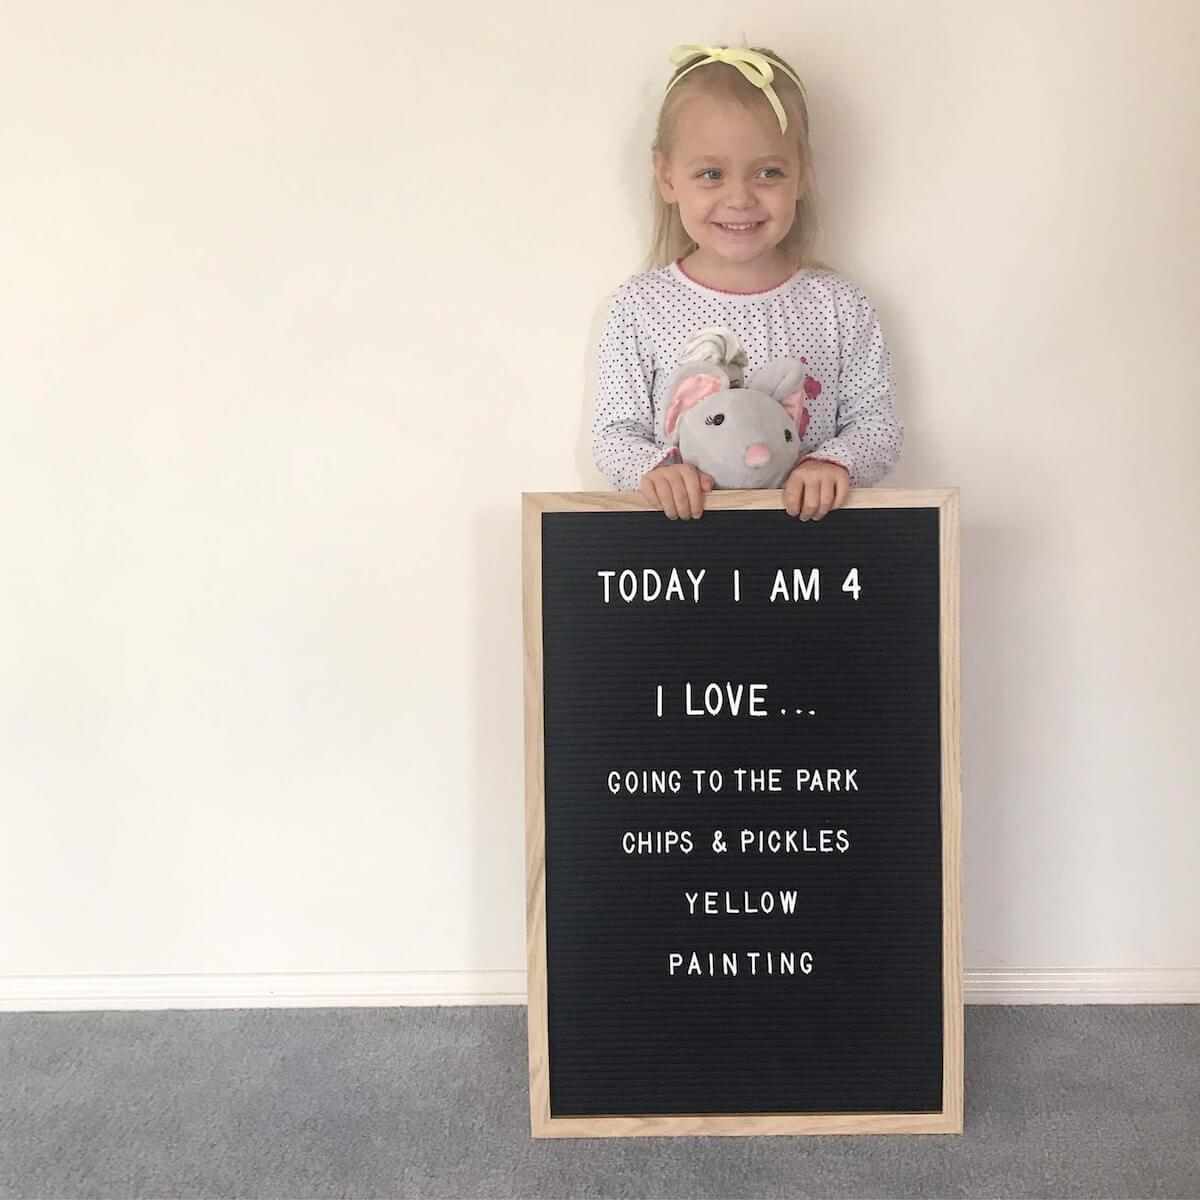 Child holding a large letterboard to celebrate her 4th birthday with her favourite things listed.